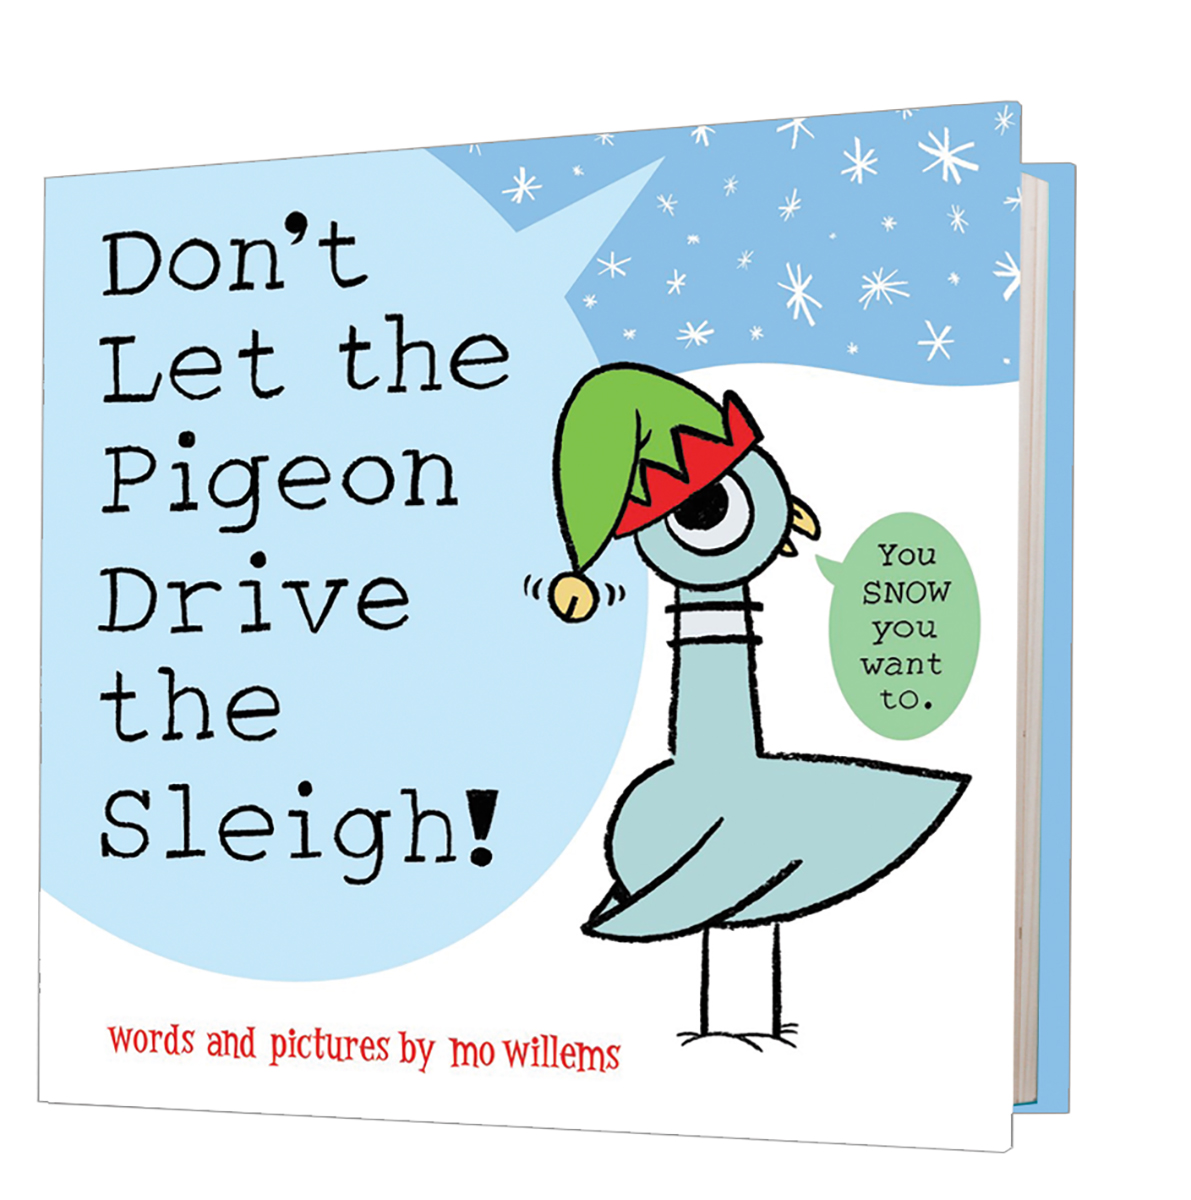  Don't Let the Pigeon Drive the Sleigh! 